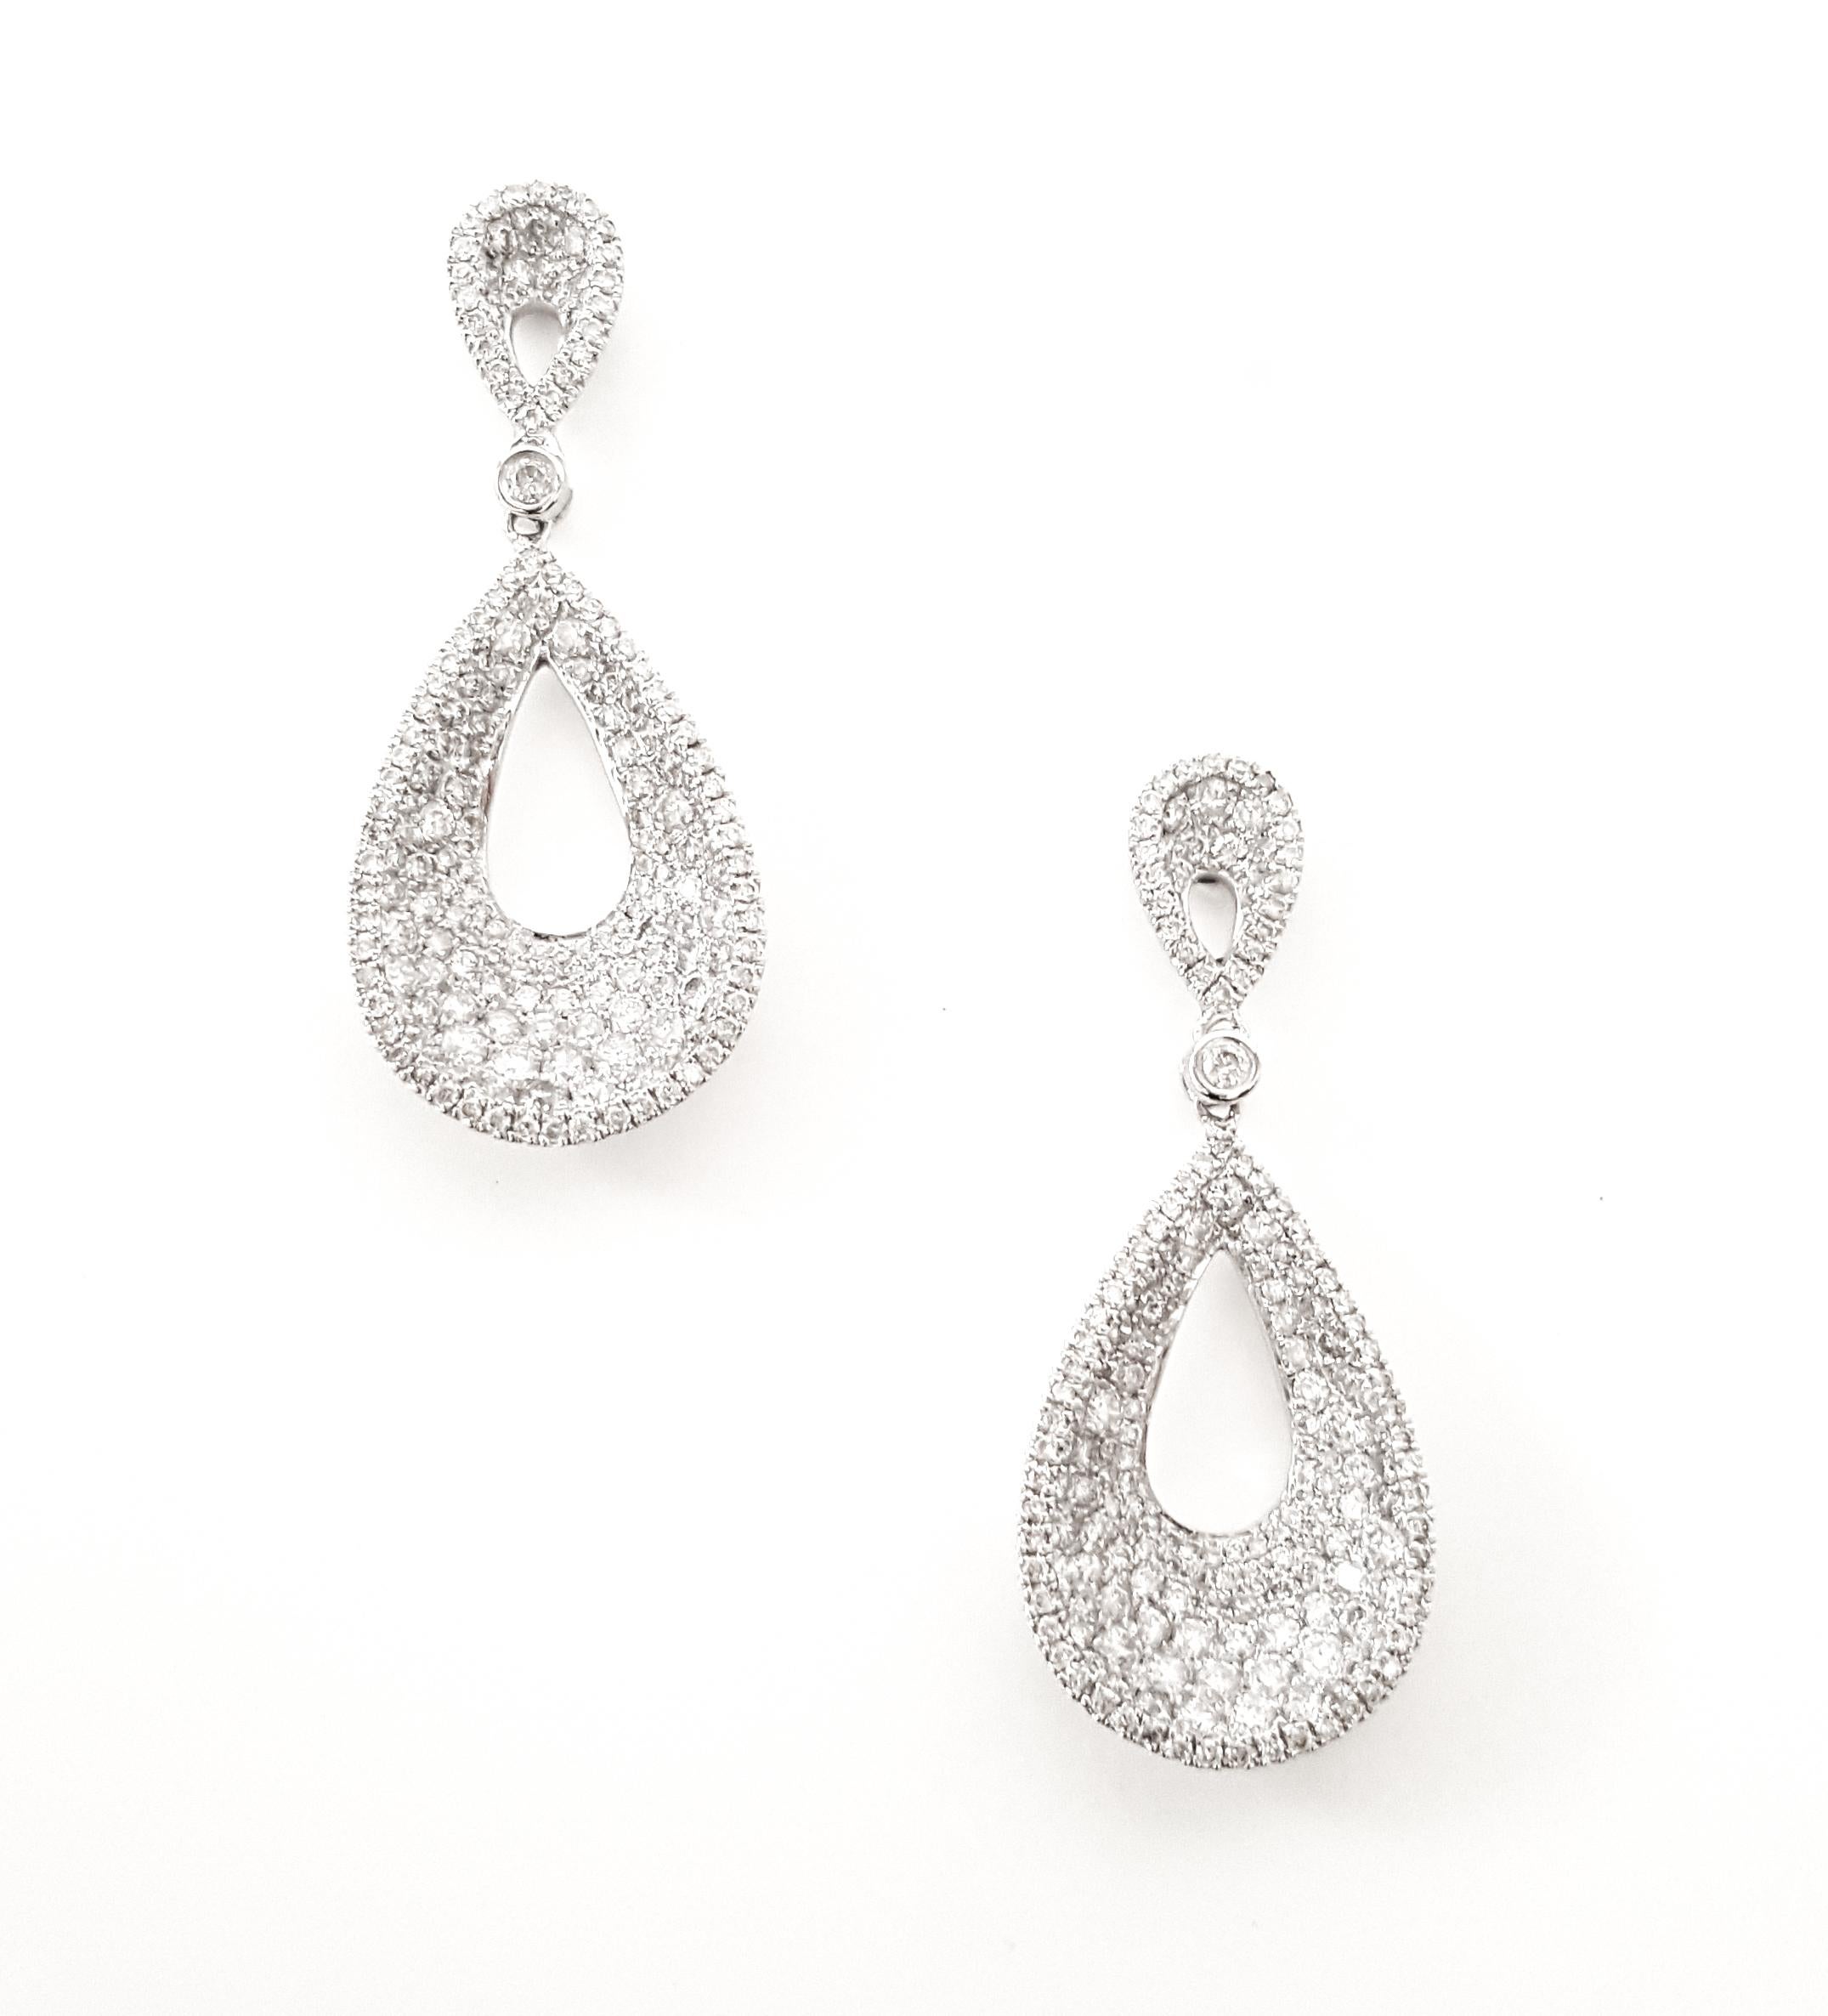 Round Cut Dazzling 14KW Diamond Dangling Earrings - 1.82ct Round, Concave Design For Sale